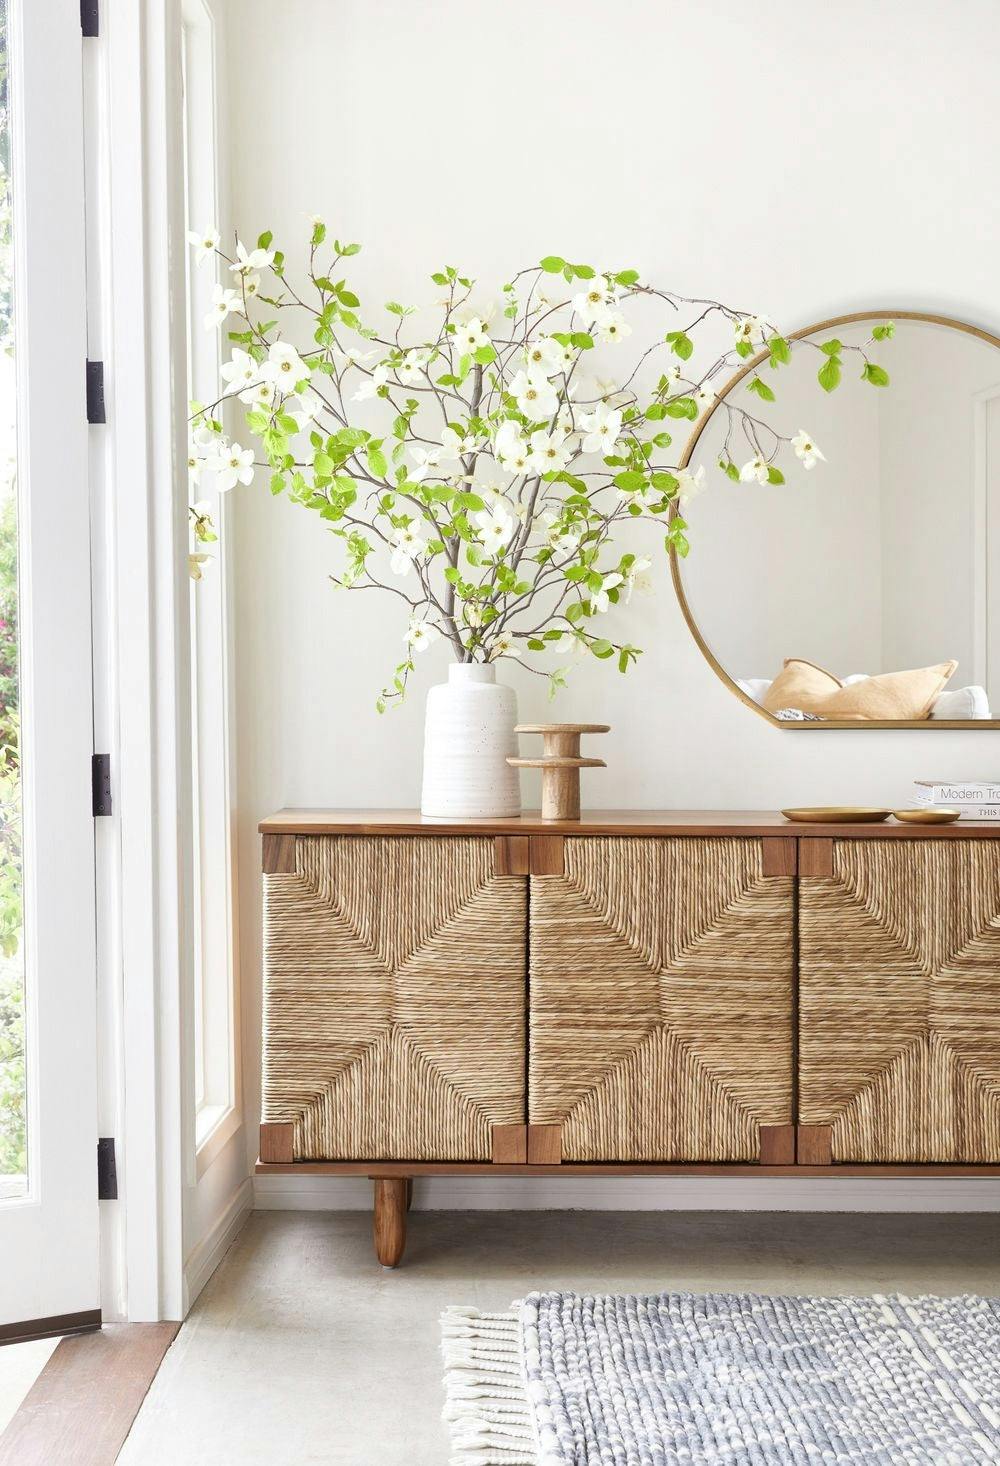 Sian Rush Seagrass and Teak Sideboard - Natural Finish